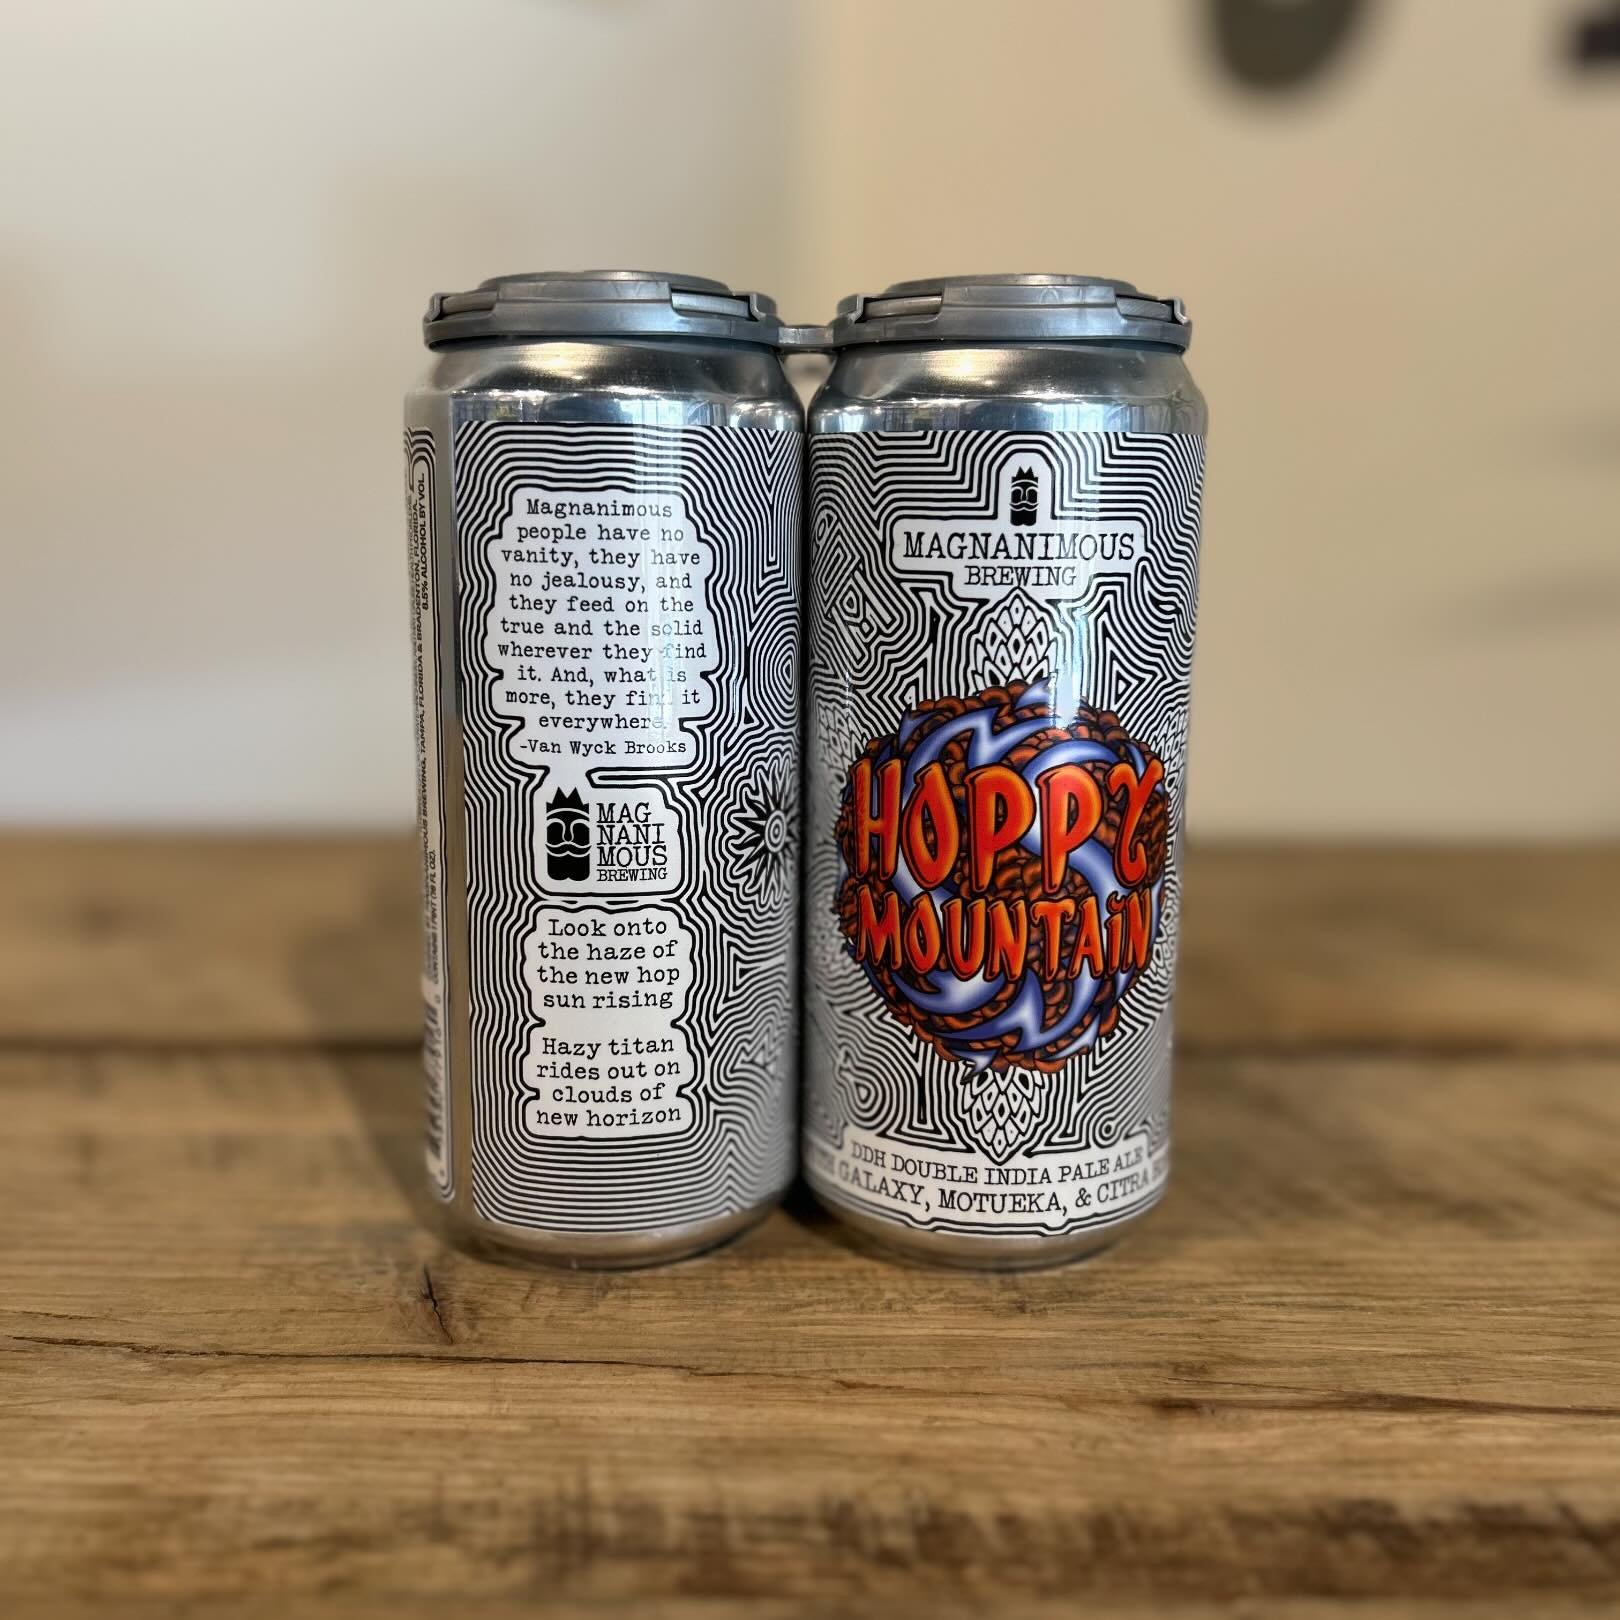 Welcoming @magnanimousbrewing back to the shop this week #NowAvailable #SudburyCraftBeer #TheSuds
&mdash;
🗿Hoppy Mountain🗿
8.5% ABV
Double Dry-Hopped Hazy Double IPA with Galaxy, Citra &amp; Motueka hops